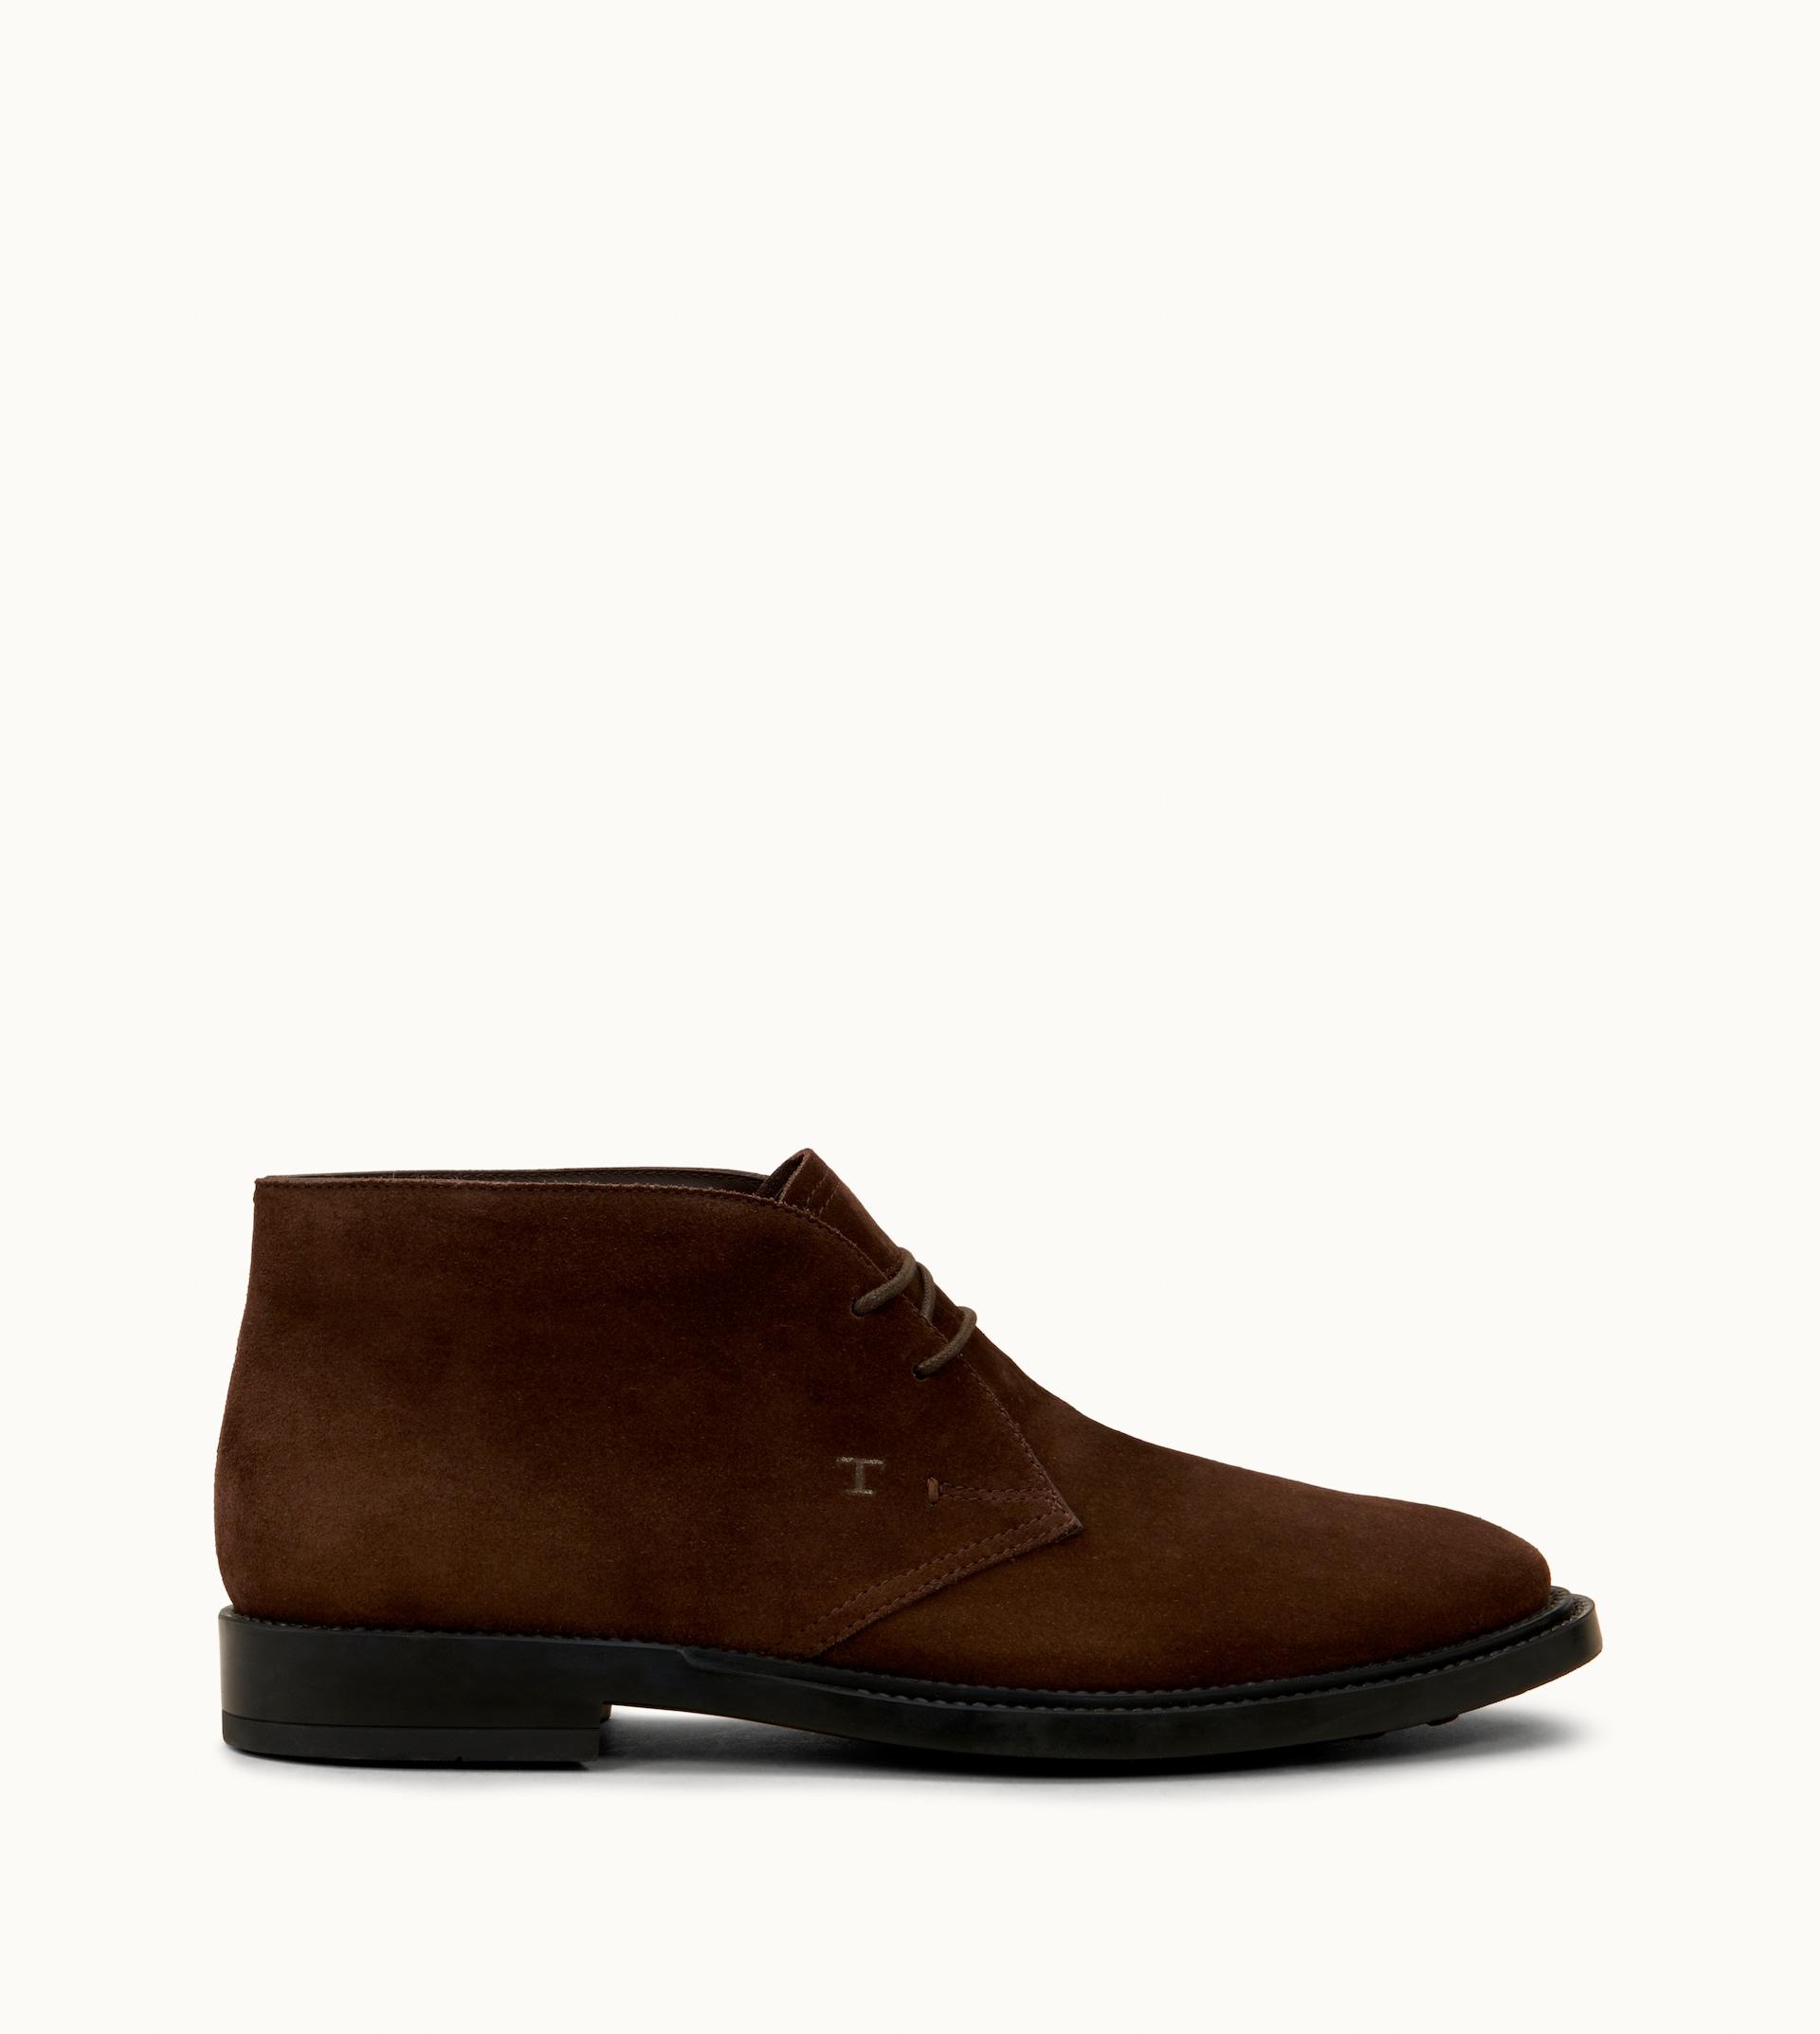 Tod's Desert Boots In Suede in Brown for Men - Lyst